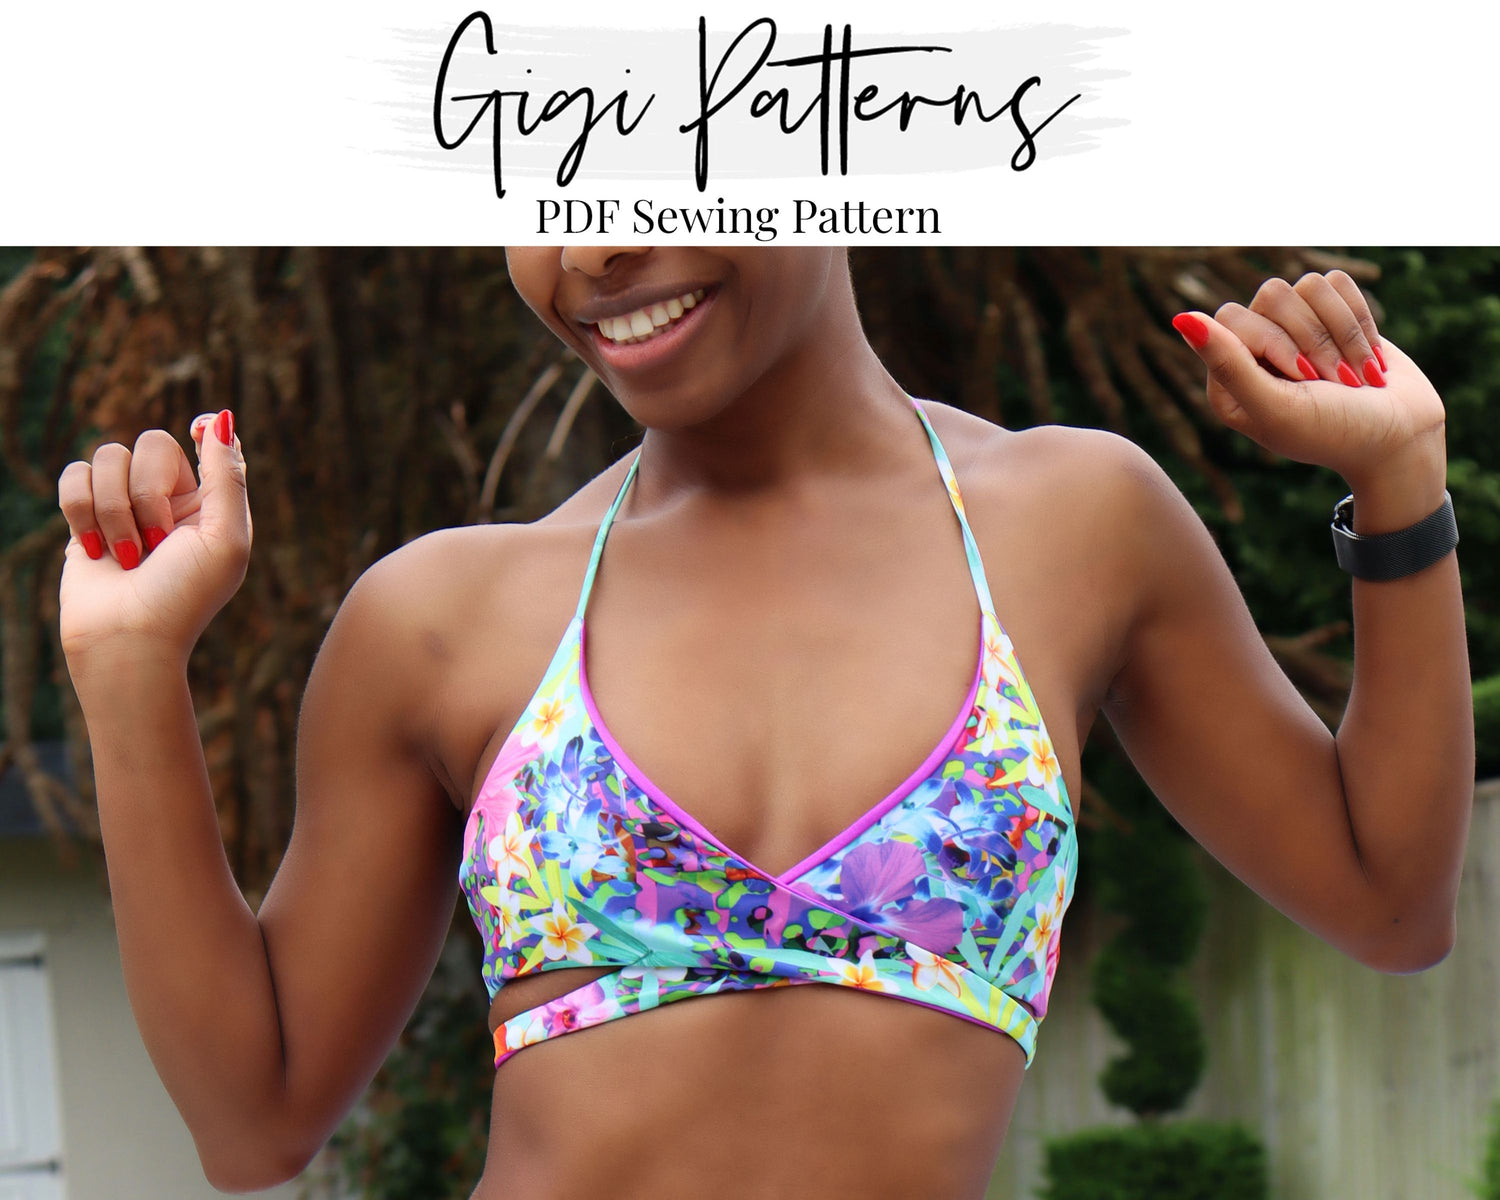 Vogue Pattern 9192 Wrap-Top Bikini, Swimsuits, and Cover-Ups